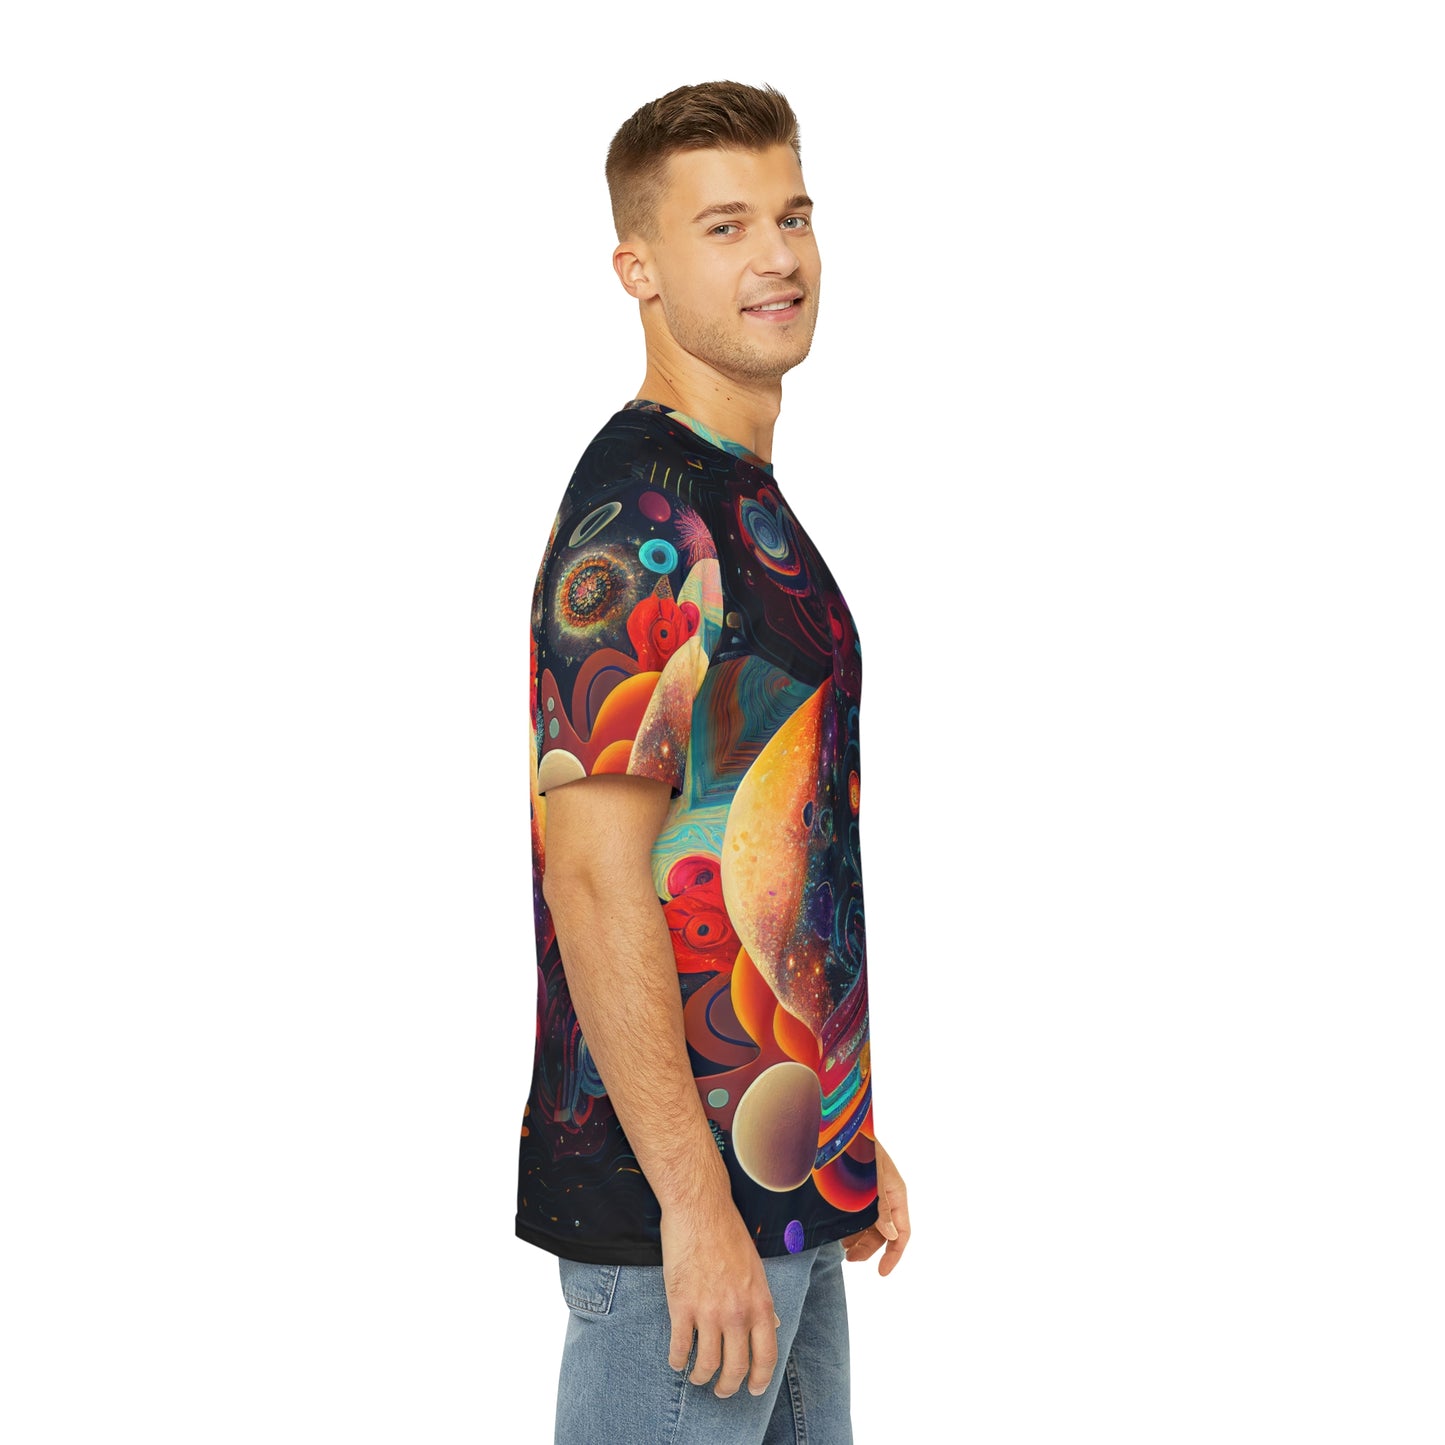 Spaced Out Men's Polyester Tee